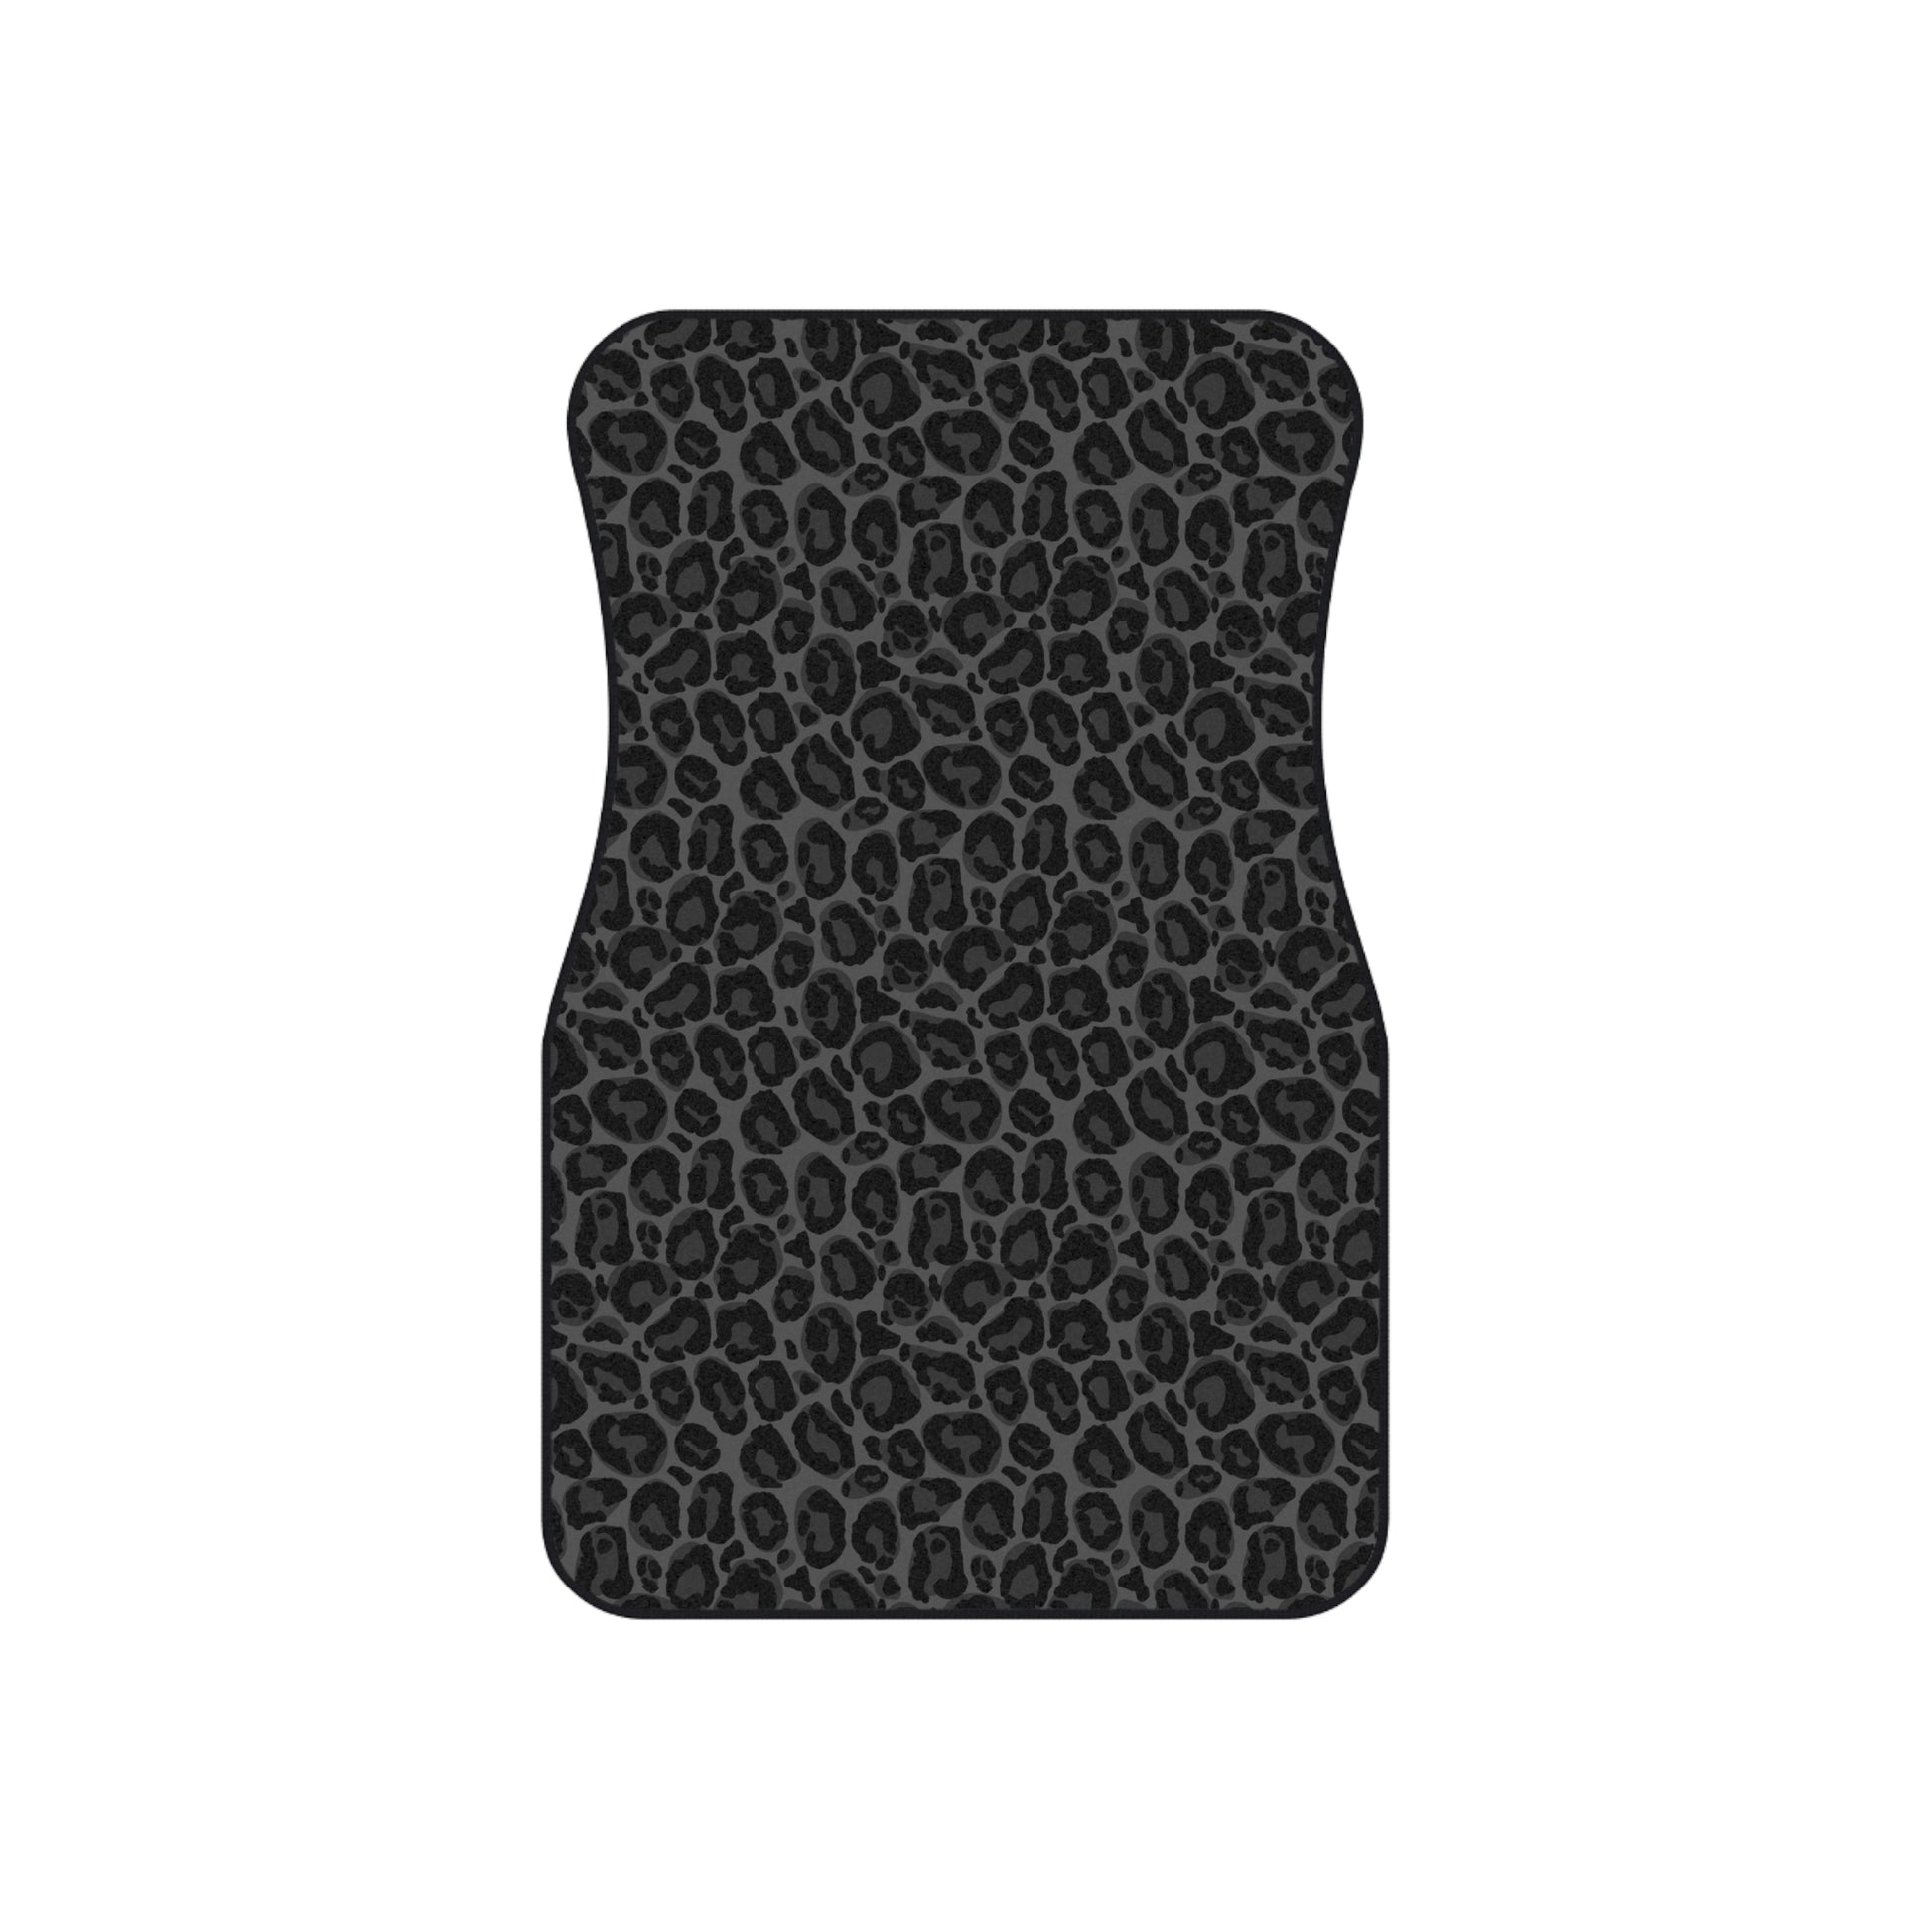 Black Leopard Car Front and Back Floor Mats (Set of 4), Cheetah Print Auto Vehicle Suv Truck Accessories Rubber All Weather Women Men Mat Starcove Fashion